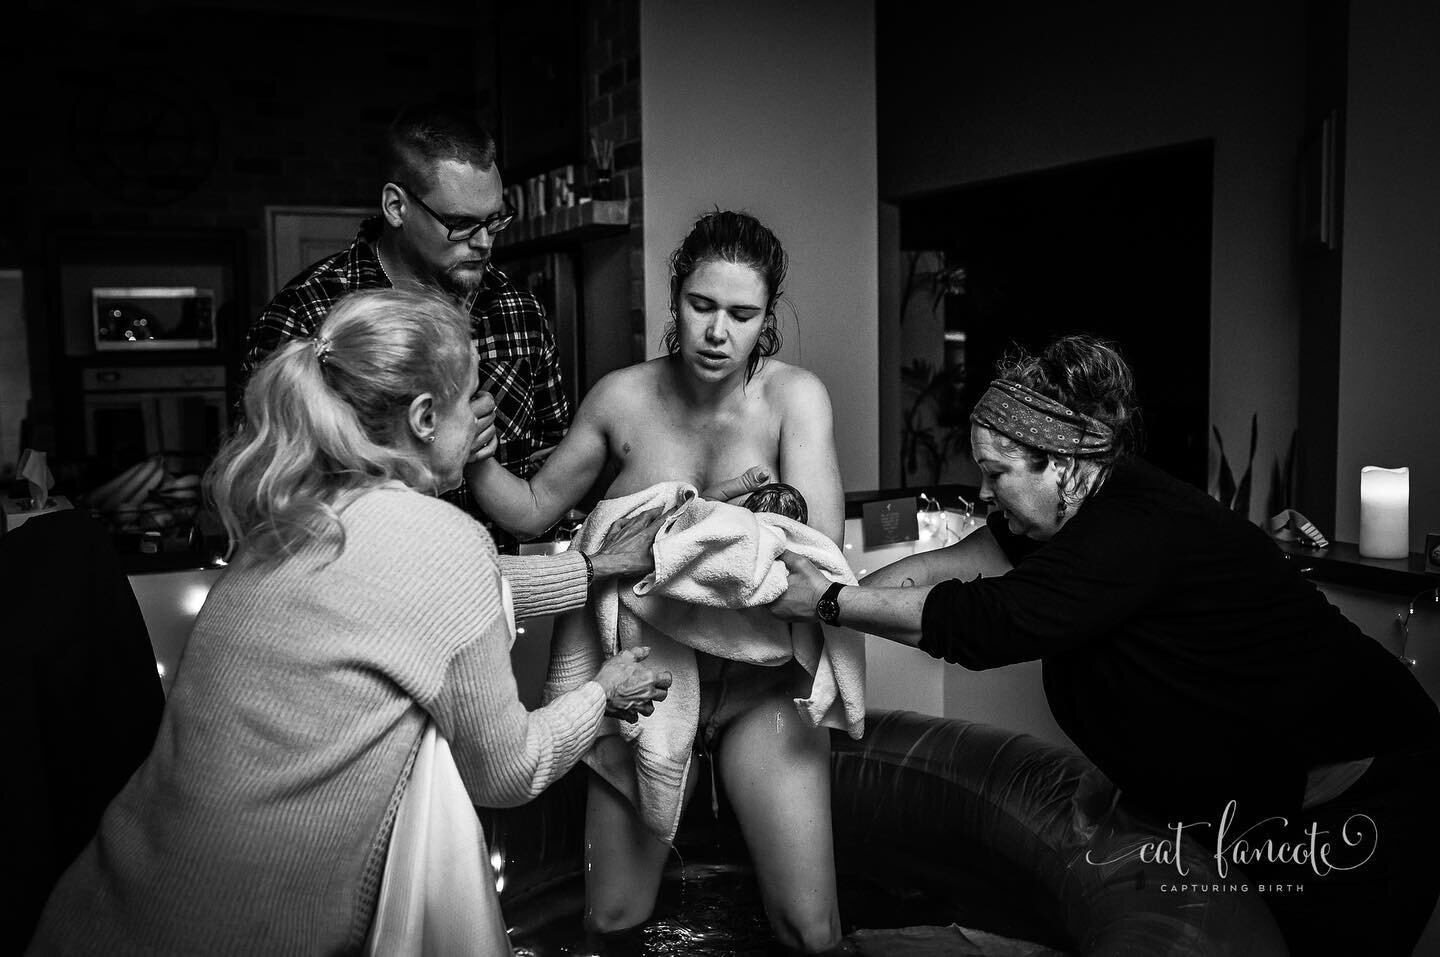 Stepping forward into motherhood.
Her baby held safely in her arms.
Scaffolded with hands of love.

Everything as it should be.

#crossingthethreshold #motherhoodunplugged #thisisbirth #takebackbirth #perthbirthphotographer #catfancote #perthdoula #m